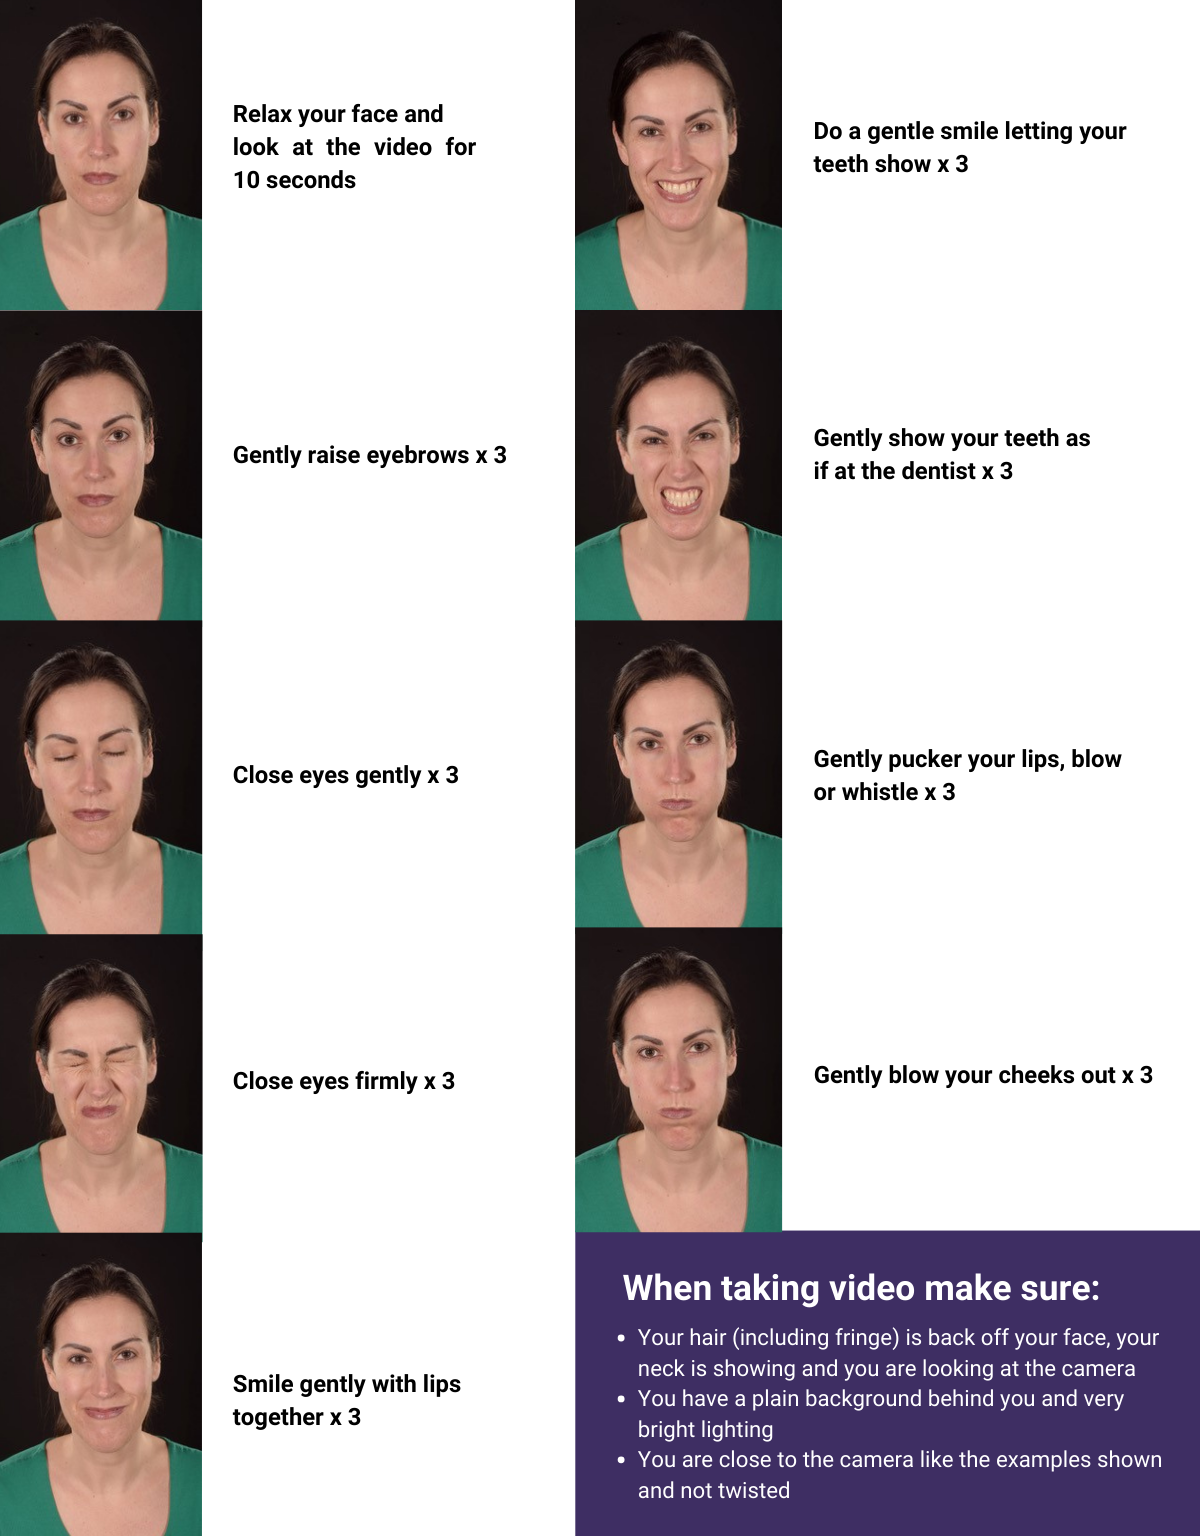 Image showing different facial expressions to make and record on video before and after an appointment for Botox